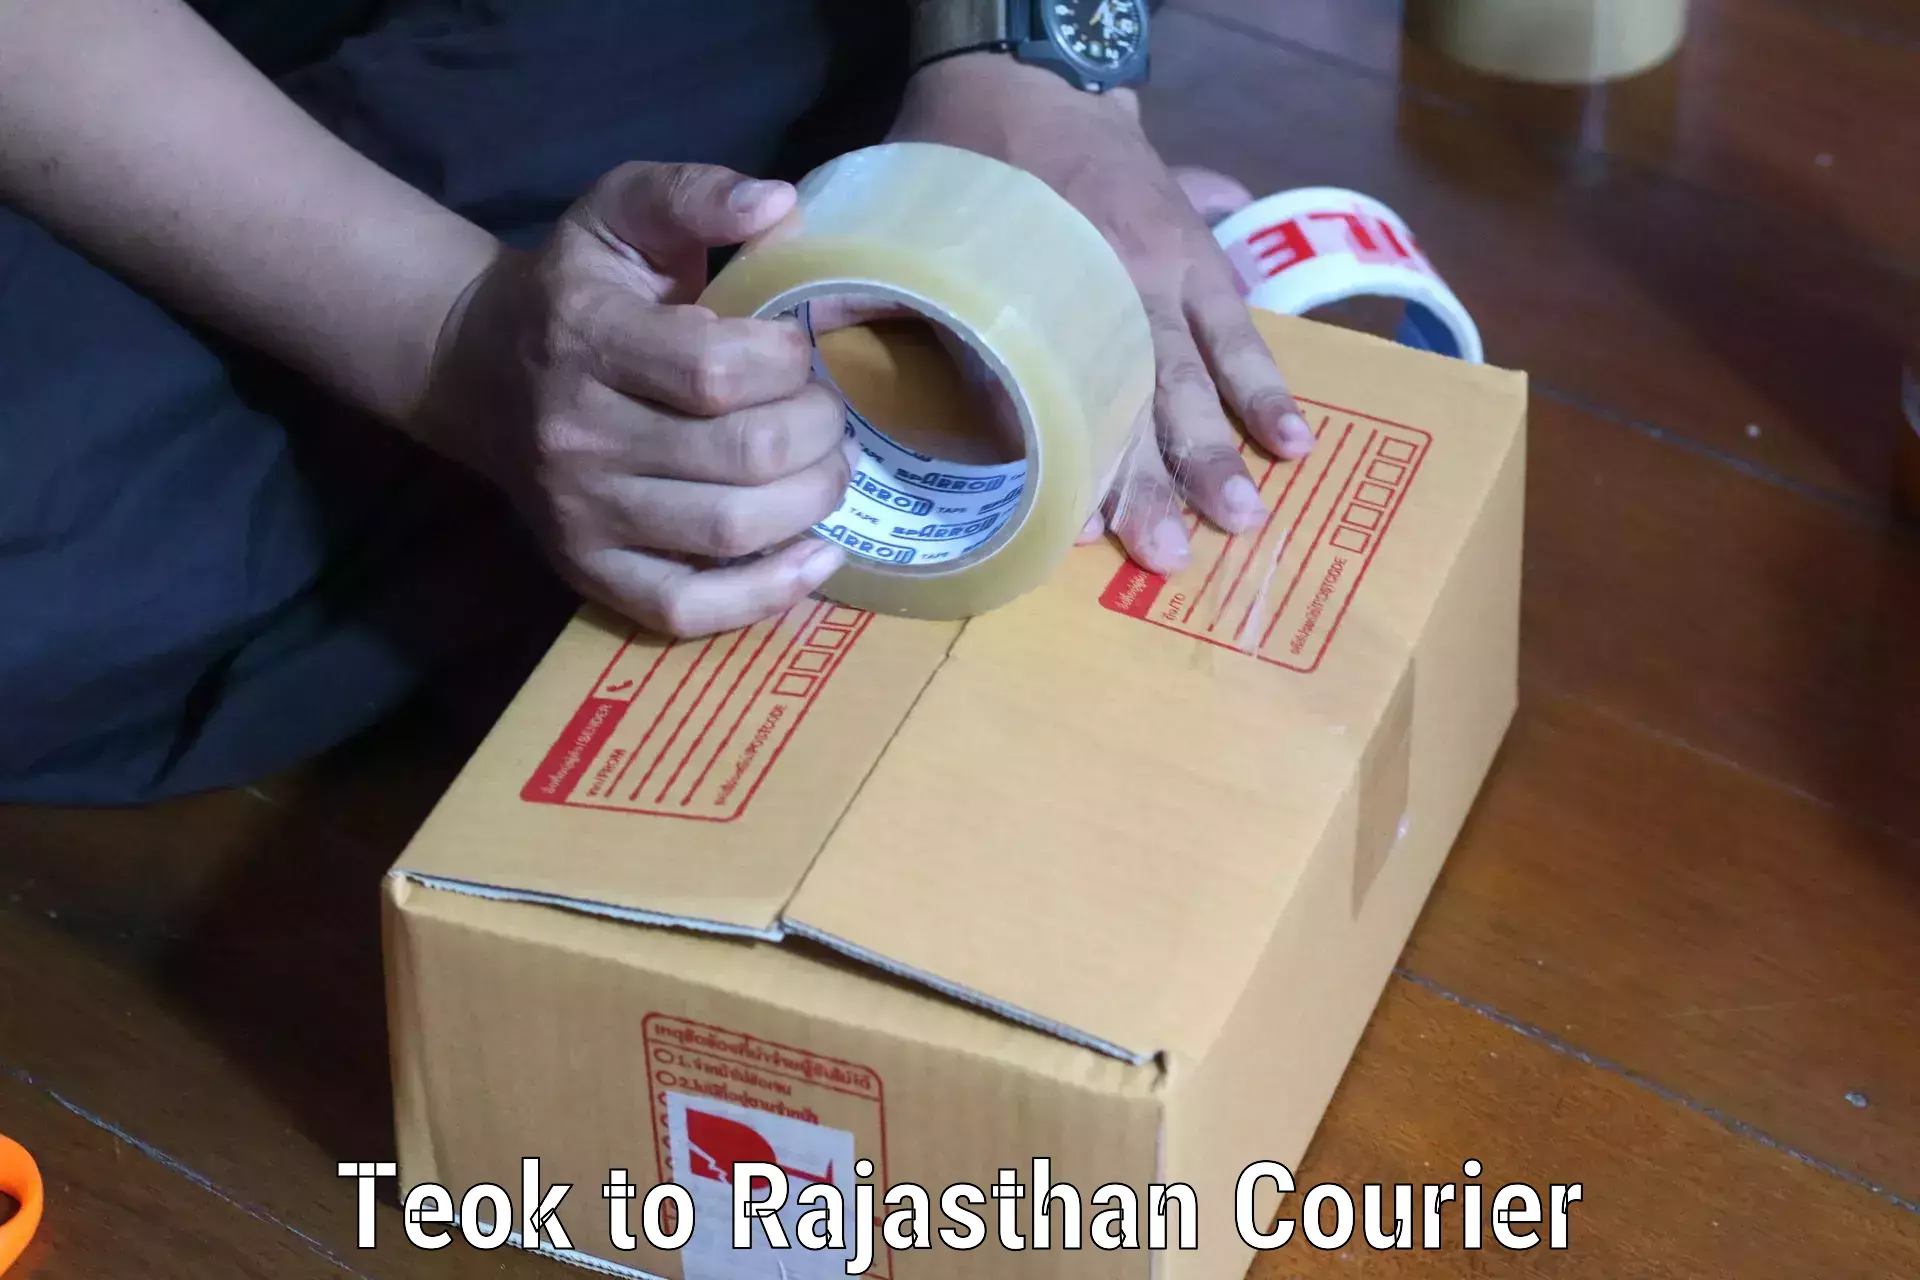 Professional courier handling Teok to Rajasthan